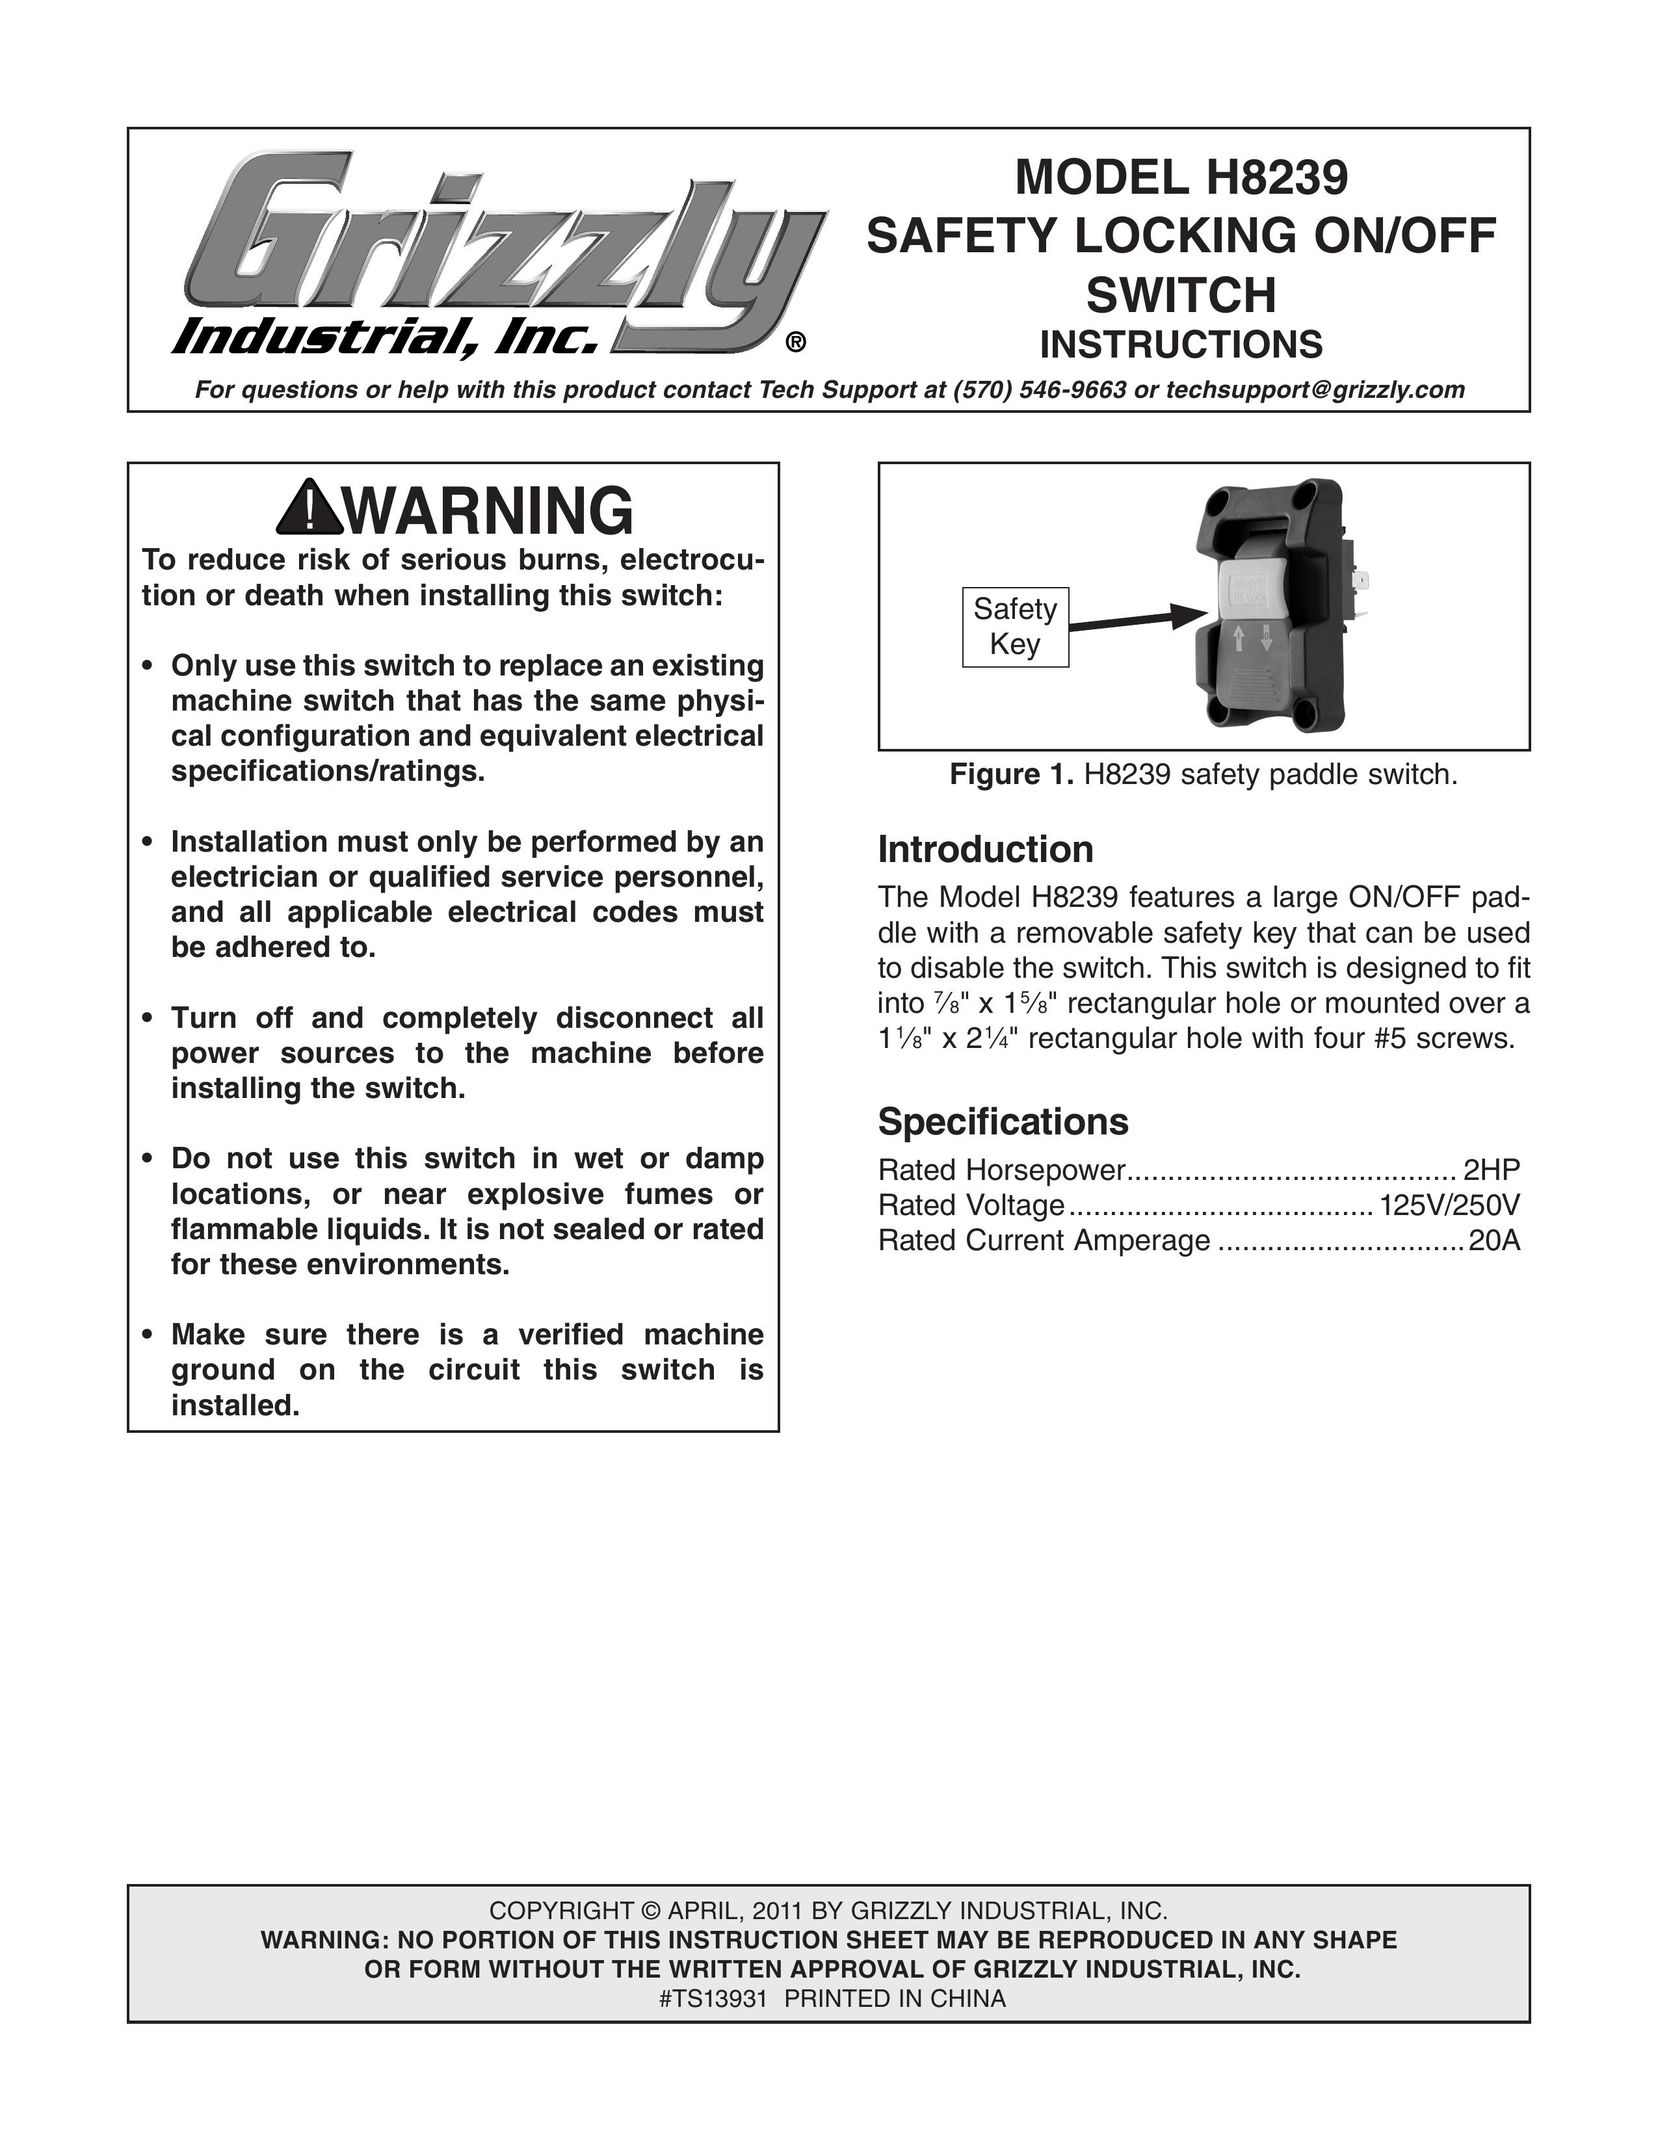 Grizzly H8239 Home Safety Product User Manual